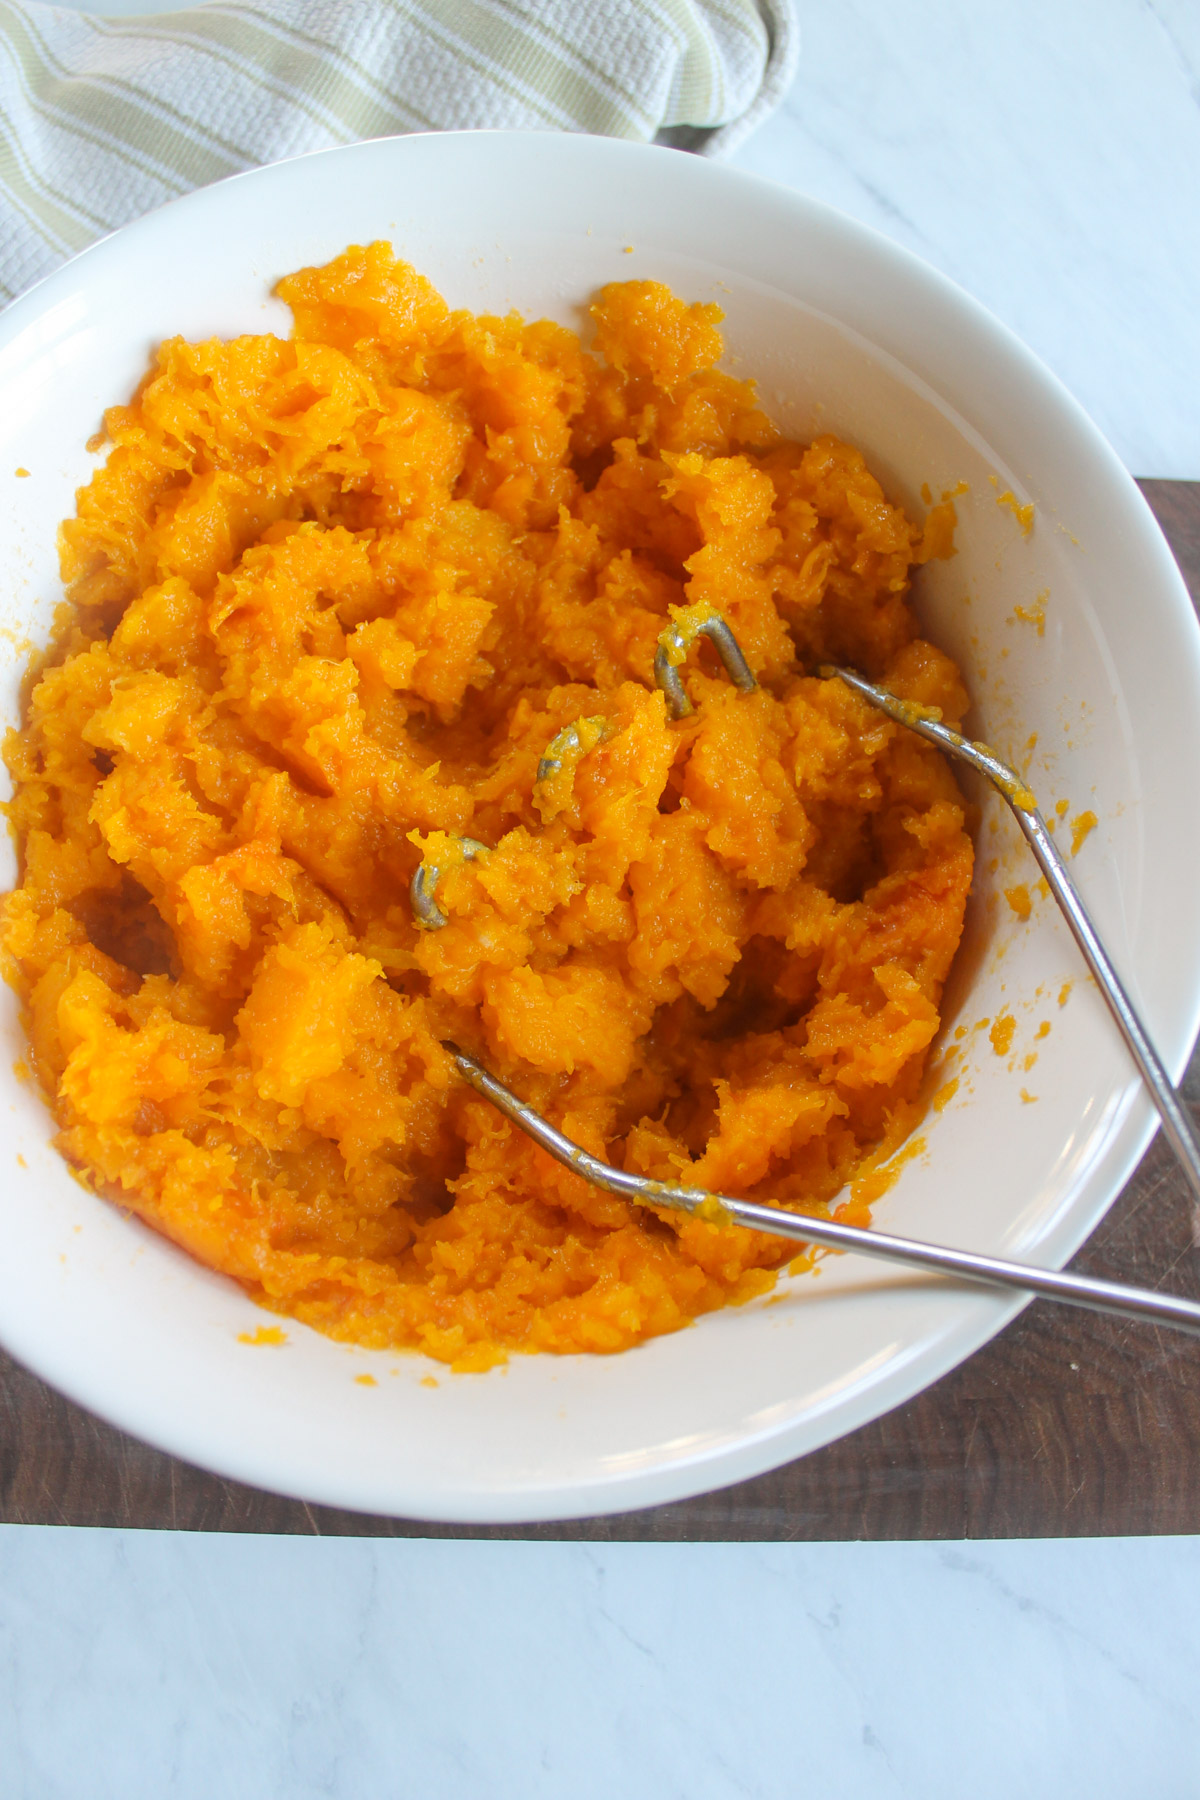 Butternut squash in a white bowl being mashed with a potato masher.